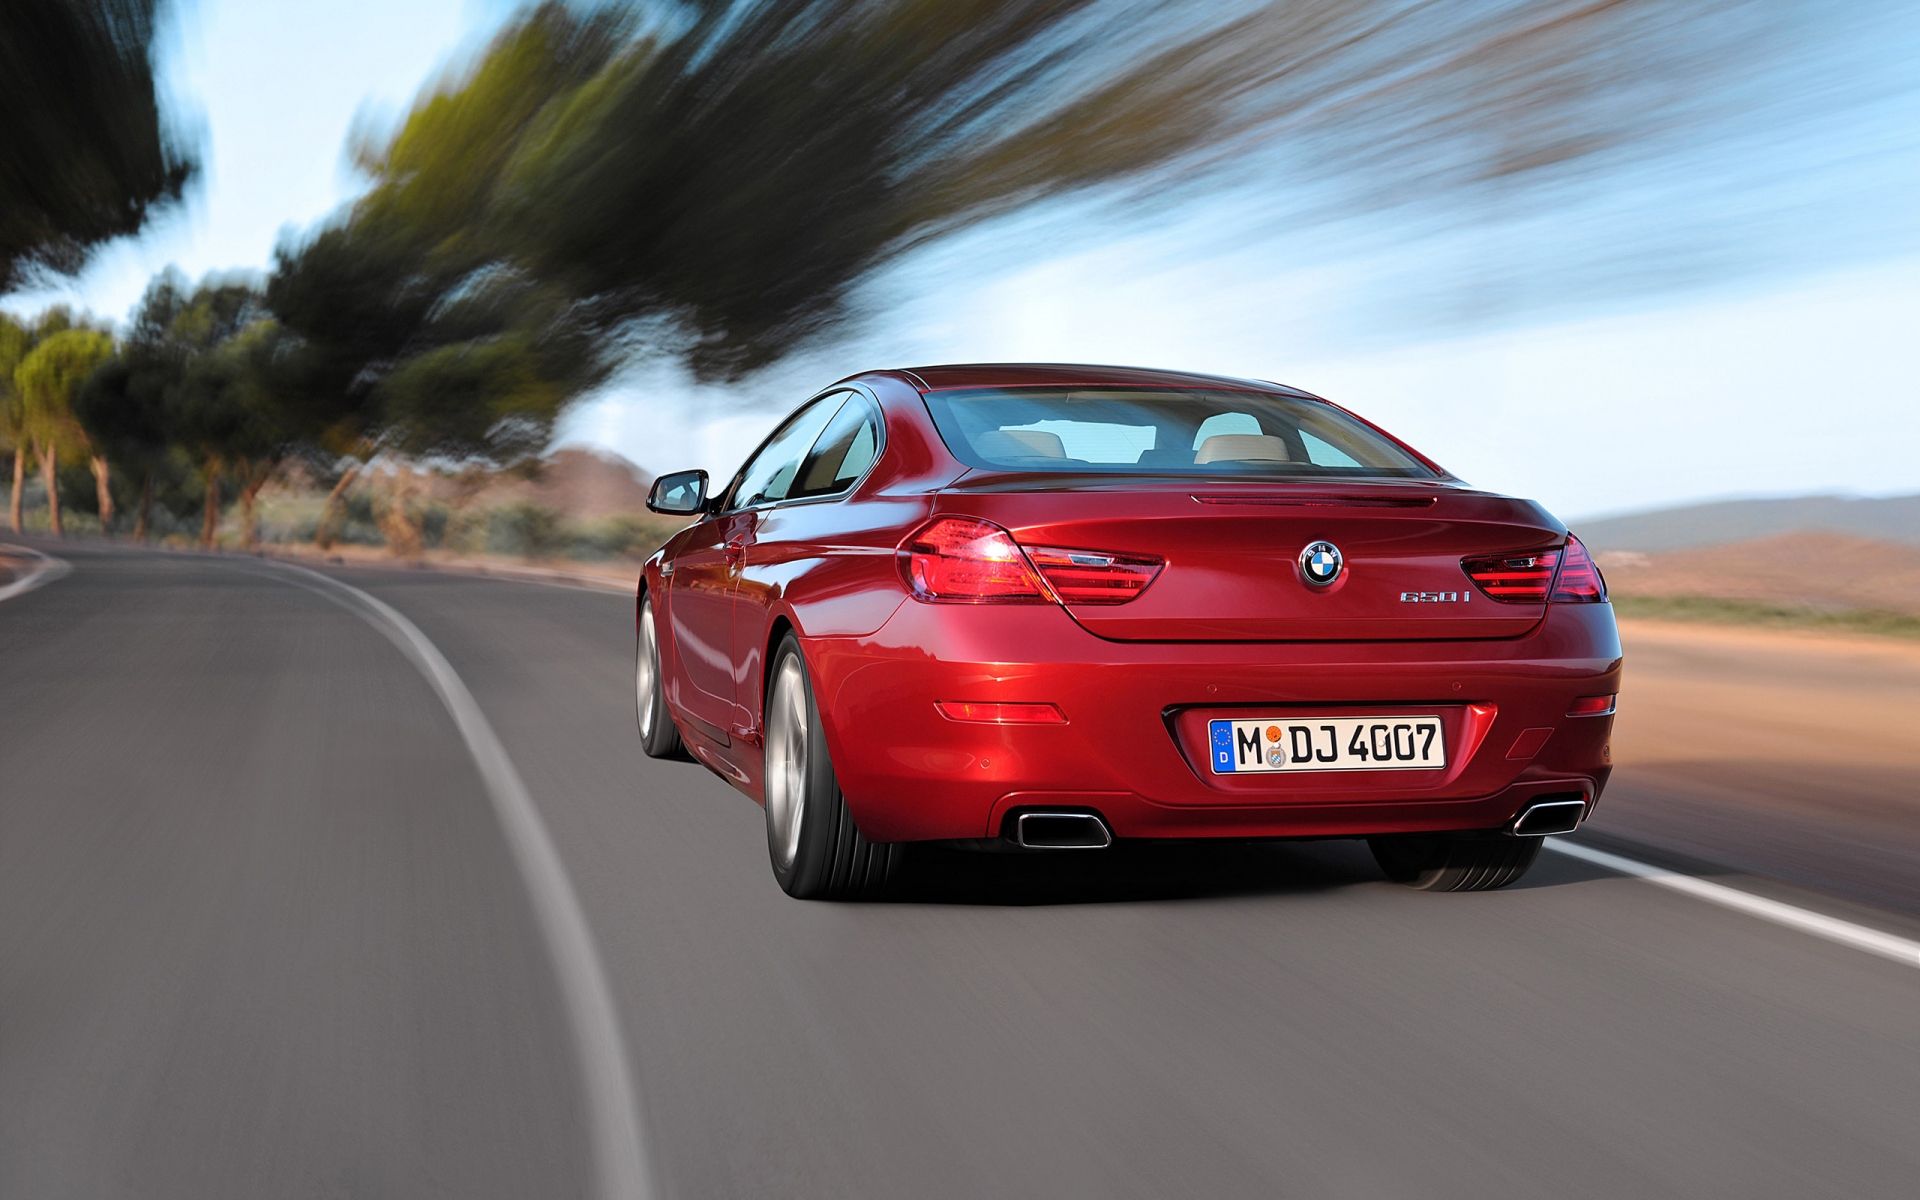 BMW 650i Coupe Rear for 1920 x 1200 widescreen resolution